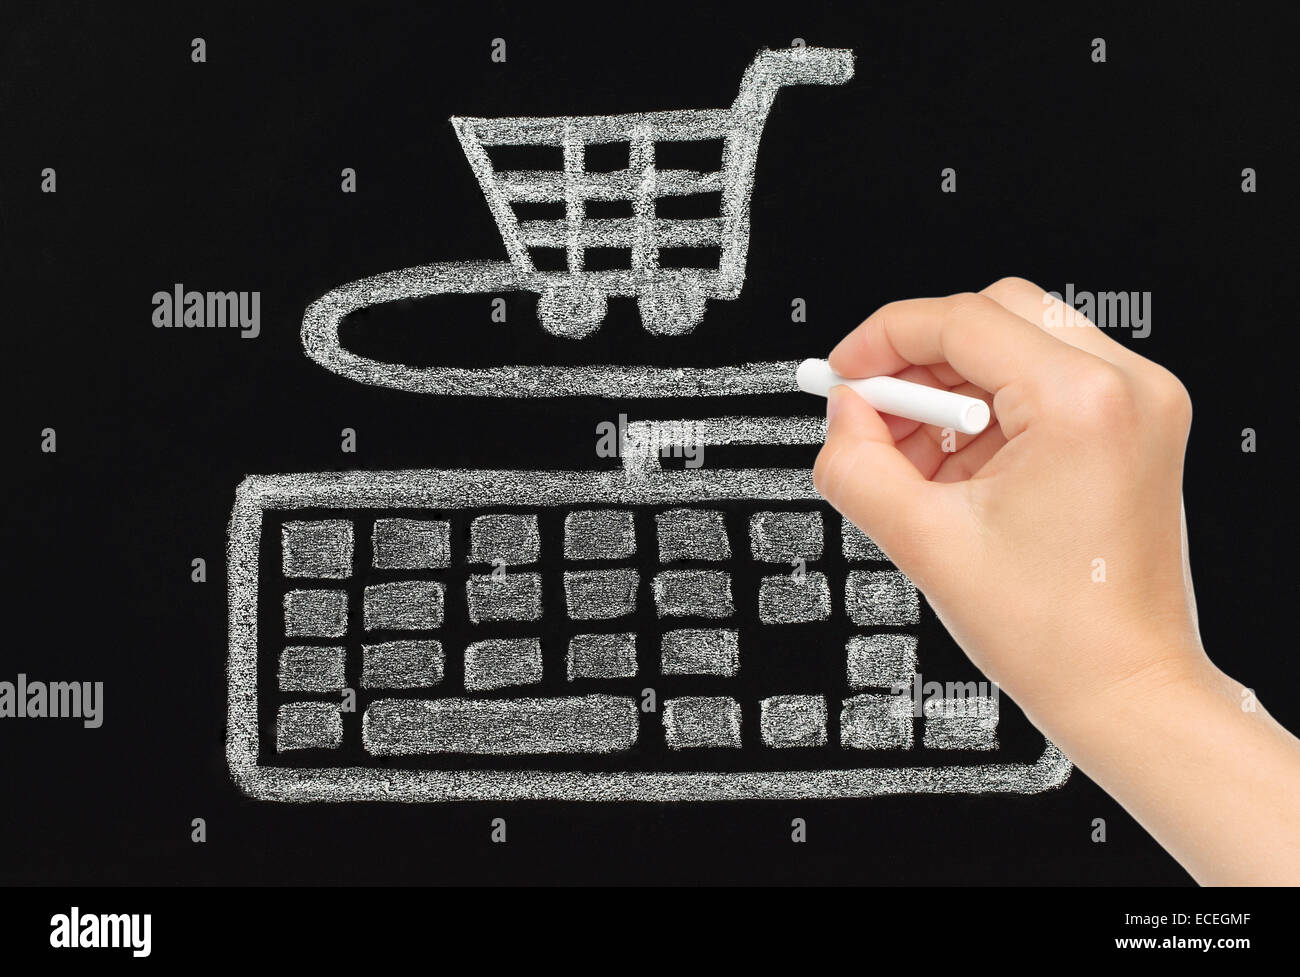 Hand drawing with chalk keyboard connected to cart, shopping concept Stock Photo